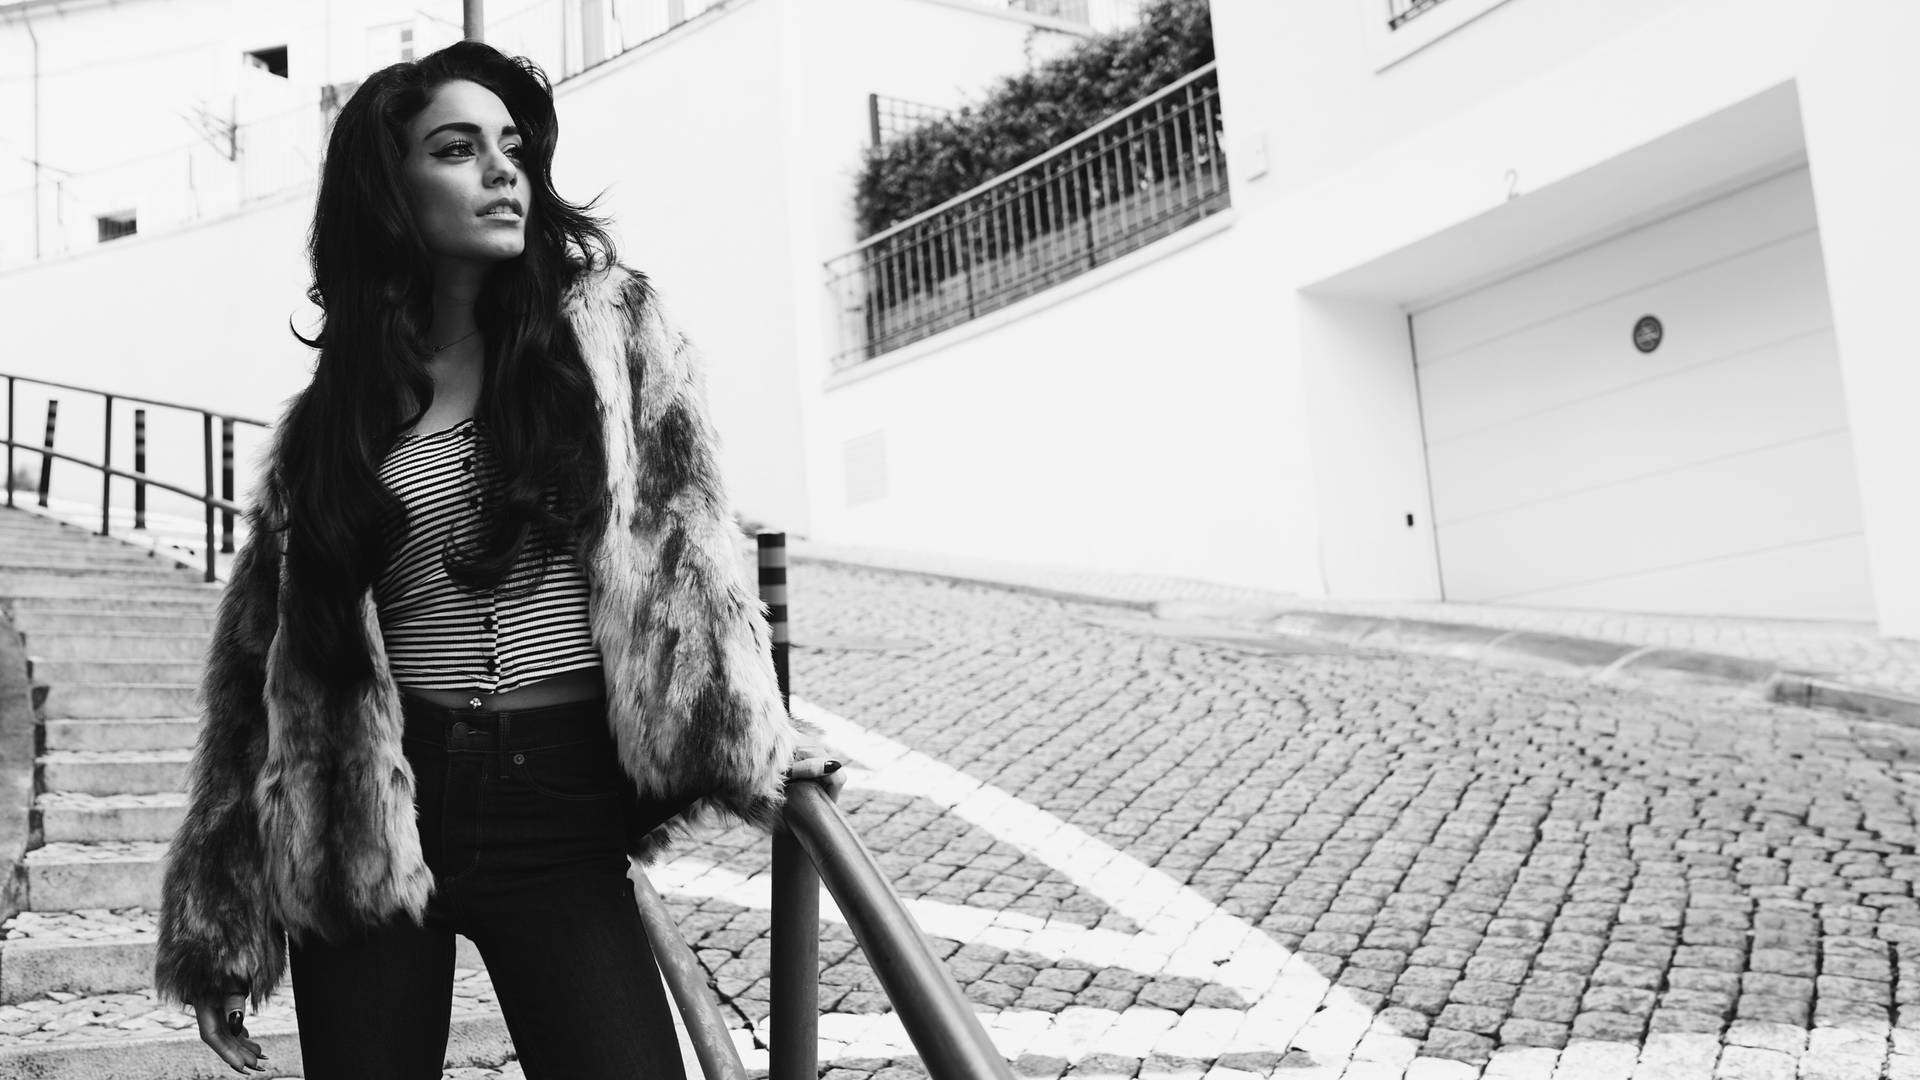 Vanessa Hudgens Black And White Fur Outfit Wallpaper